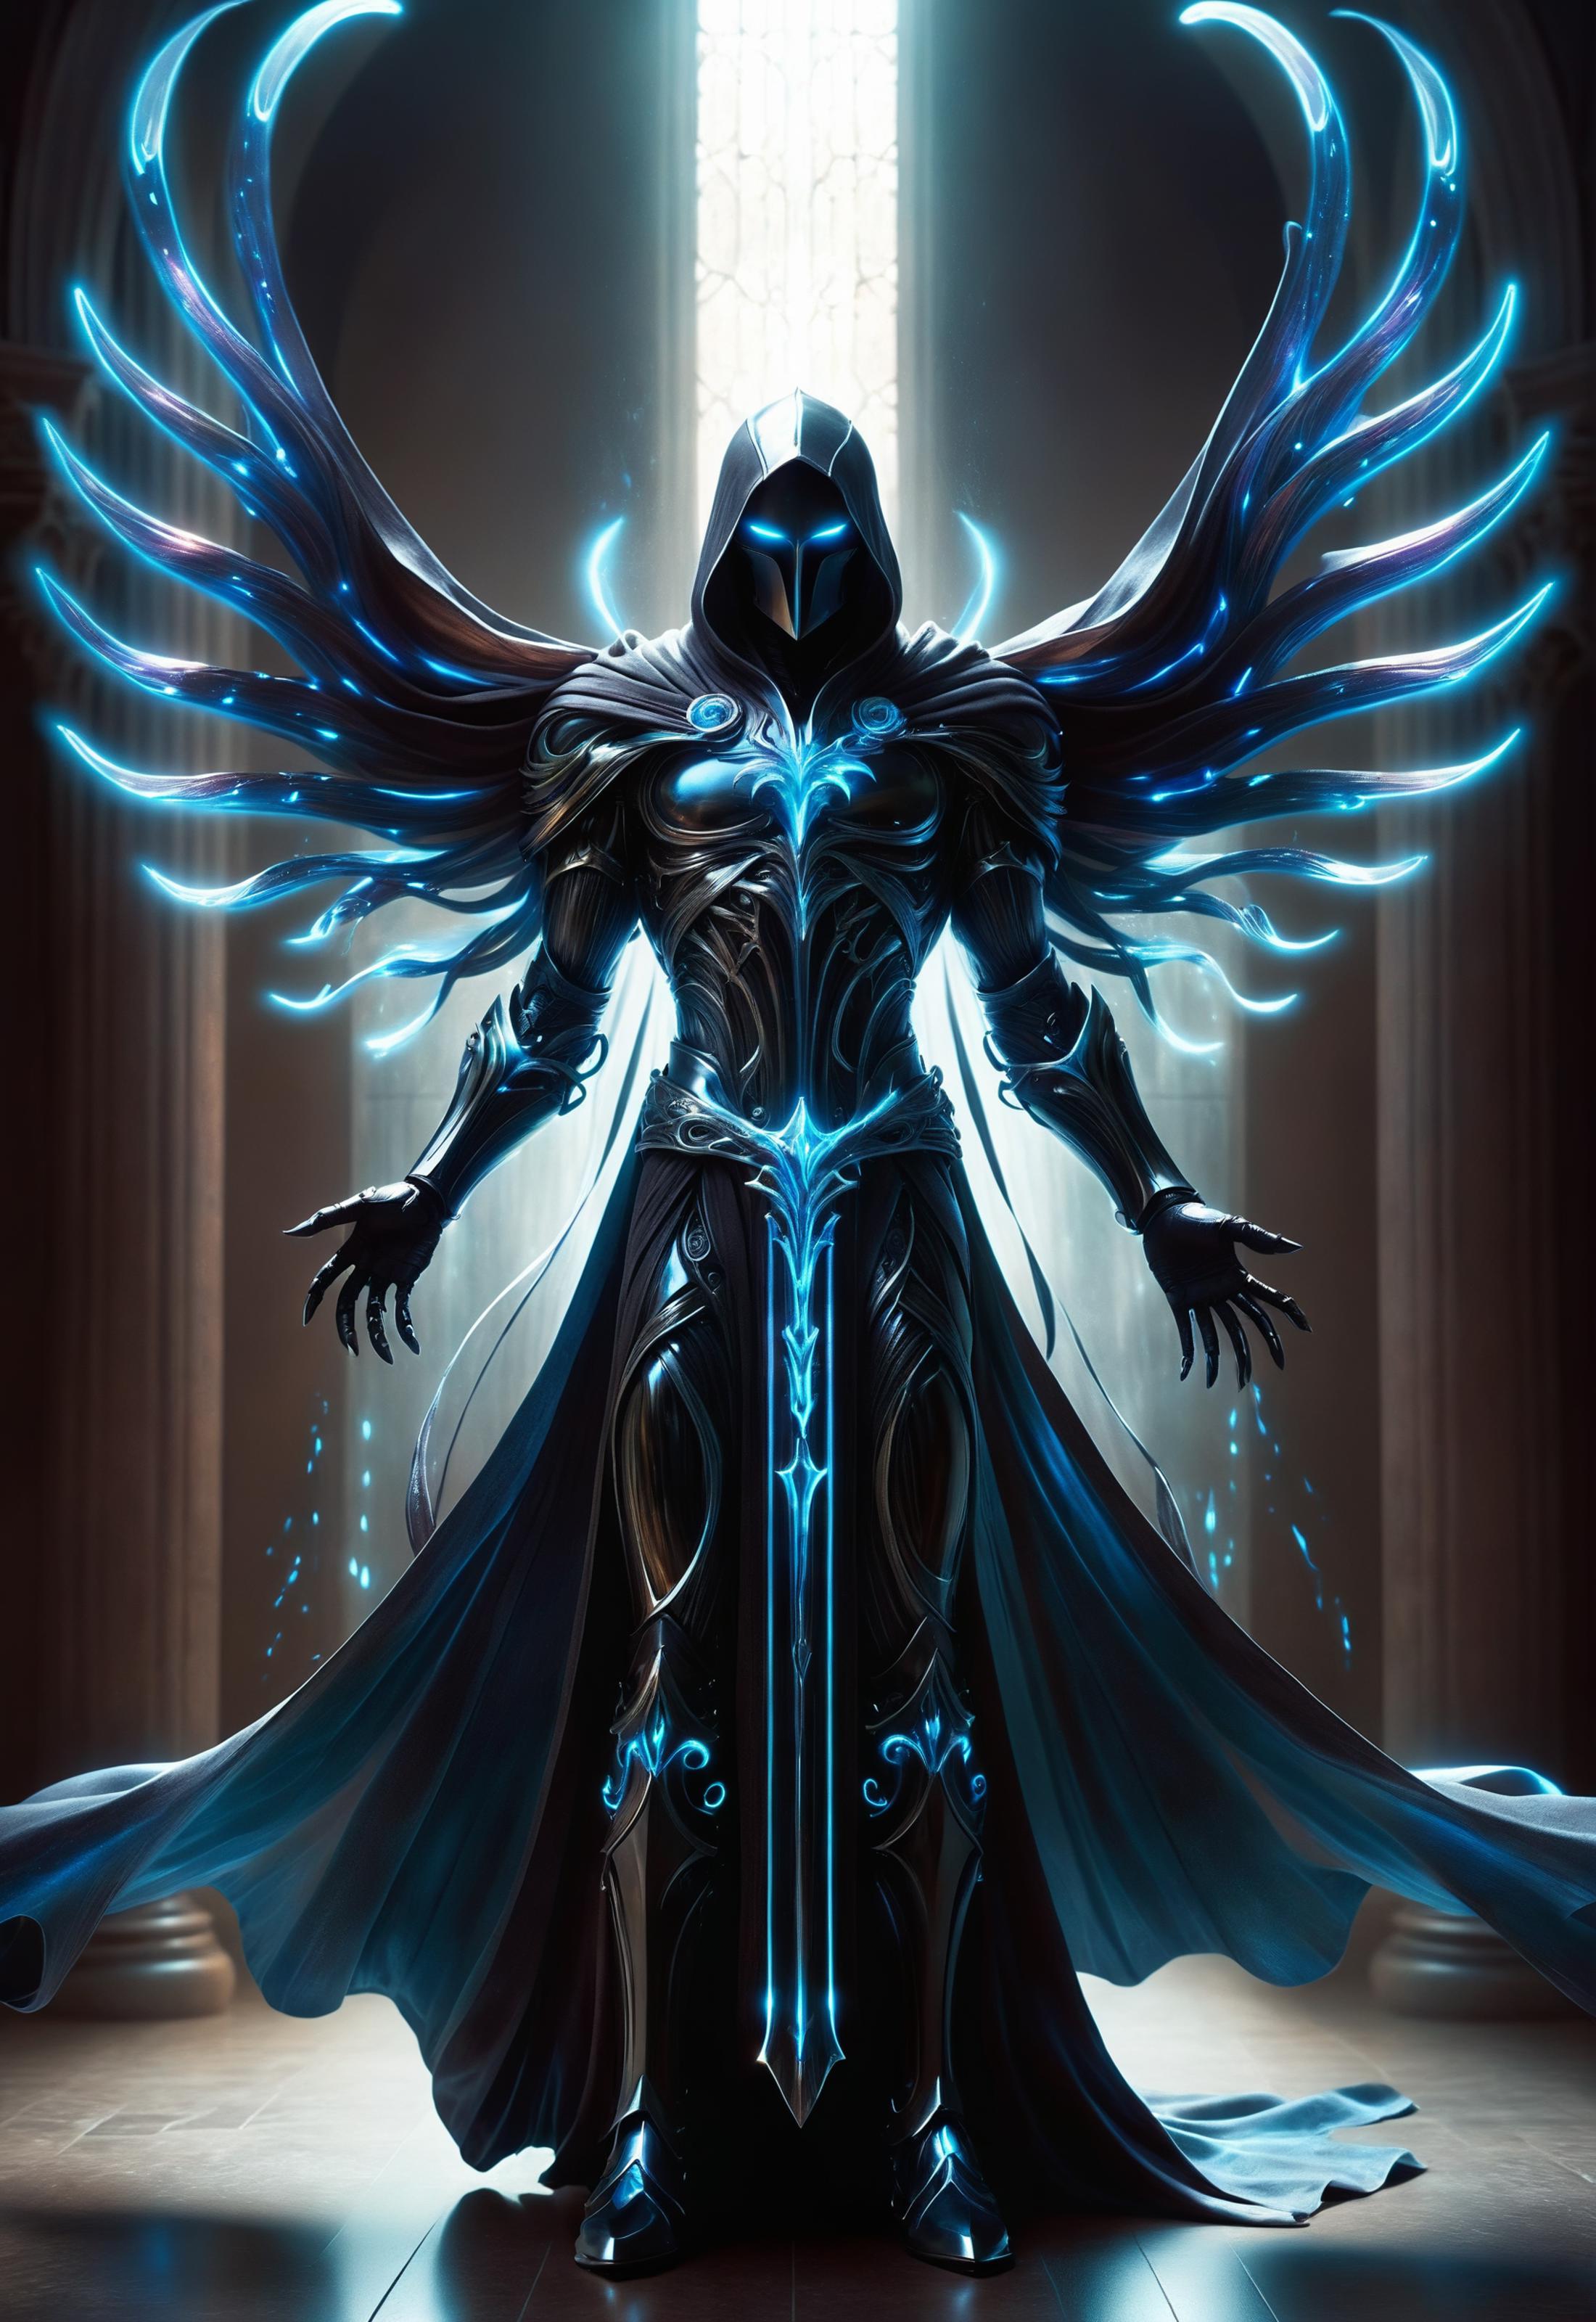 A blue and white digital drawing of an angelic figure with wings, holding a sword, and standing in front of a stone wall.